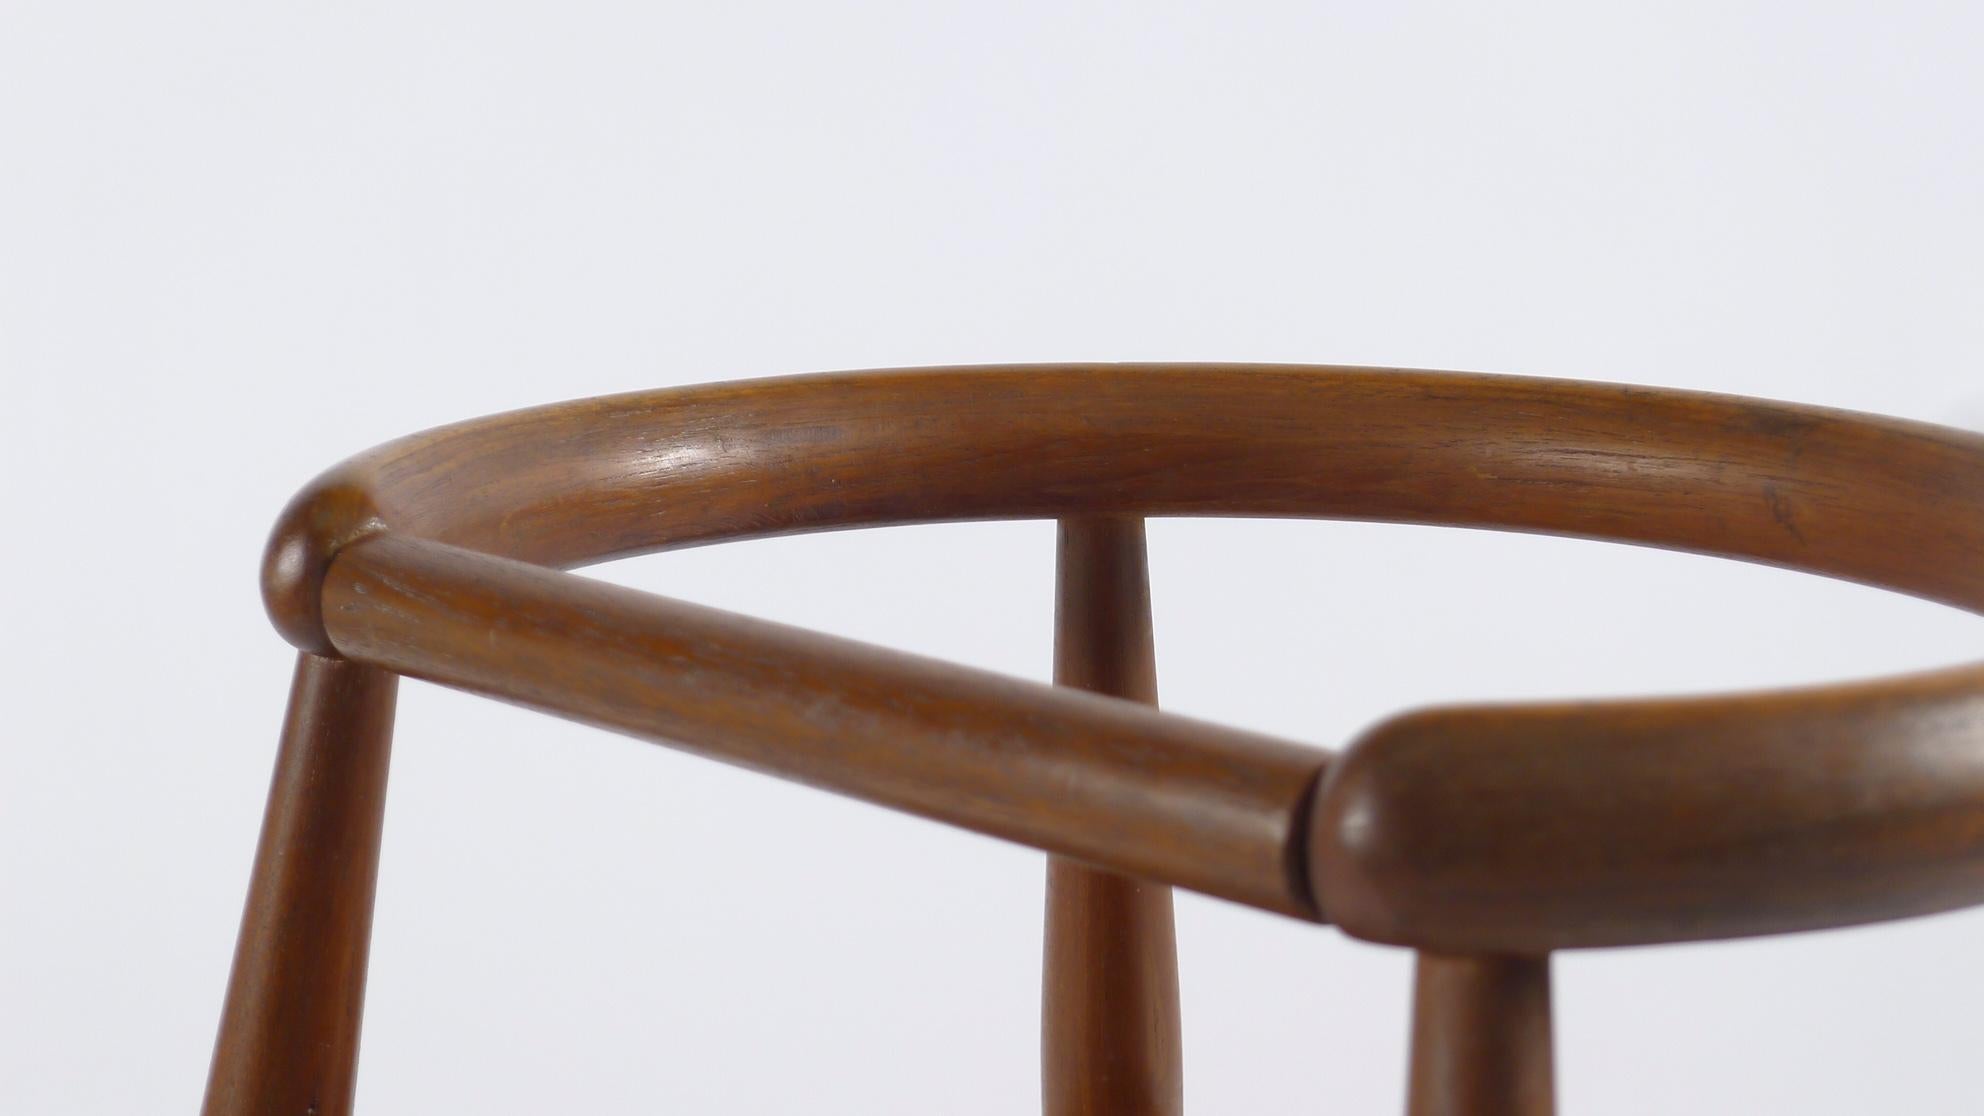 20th Century Nanna Ditzel Teak High Chair Stool, Danish 1960s with Label For Sale